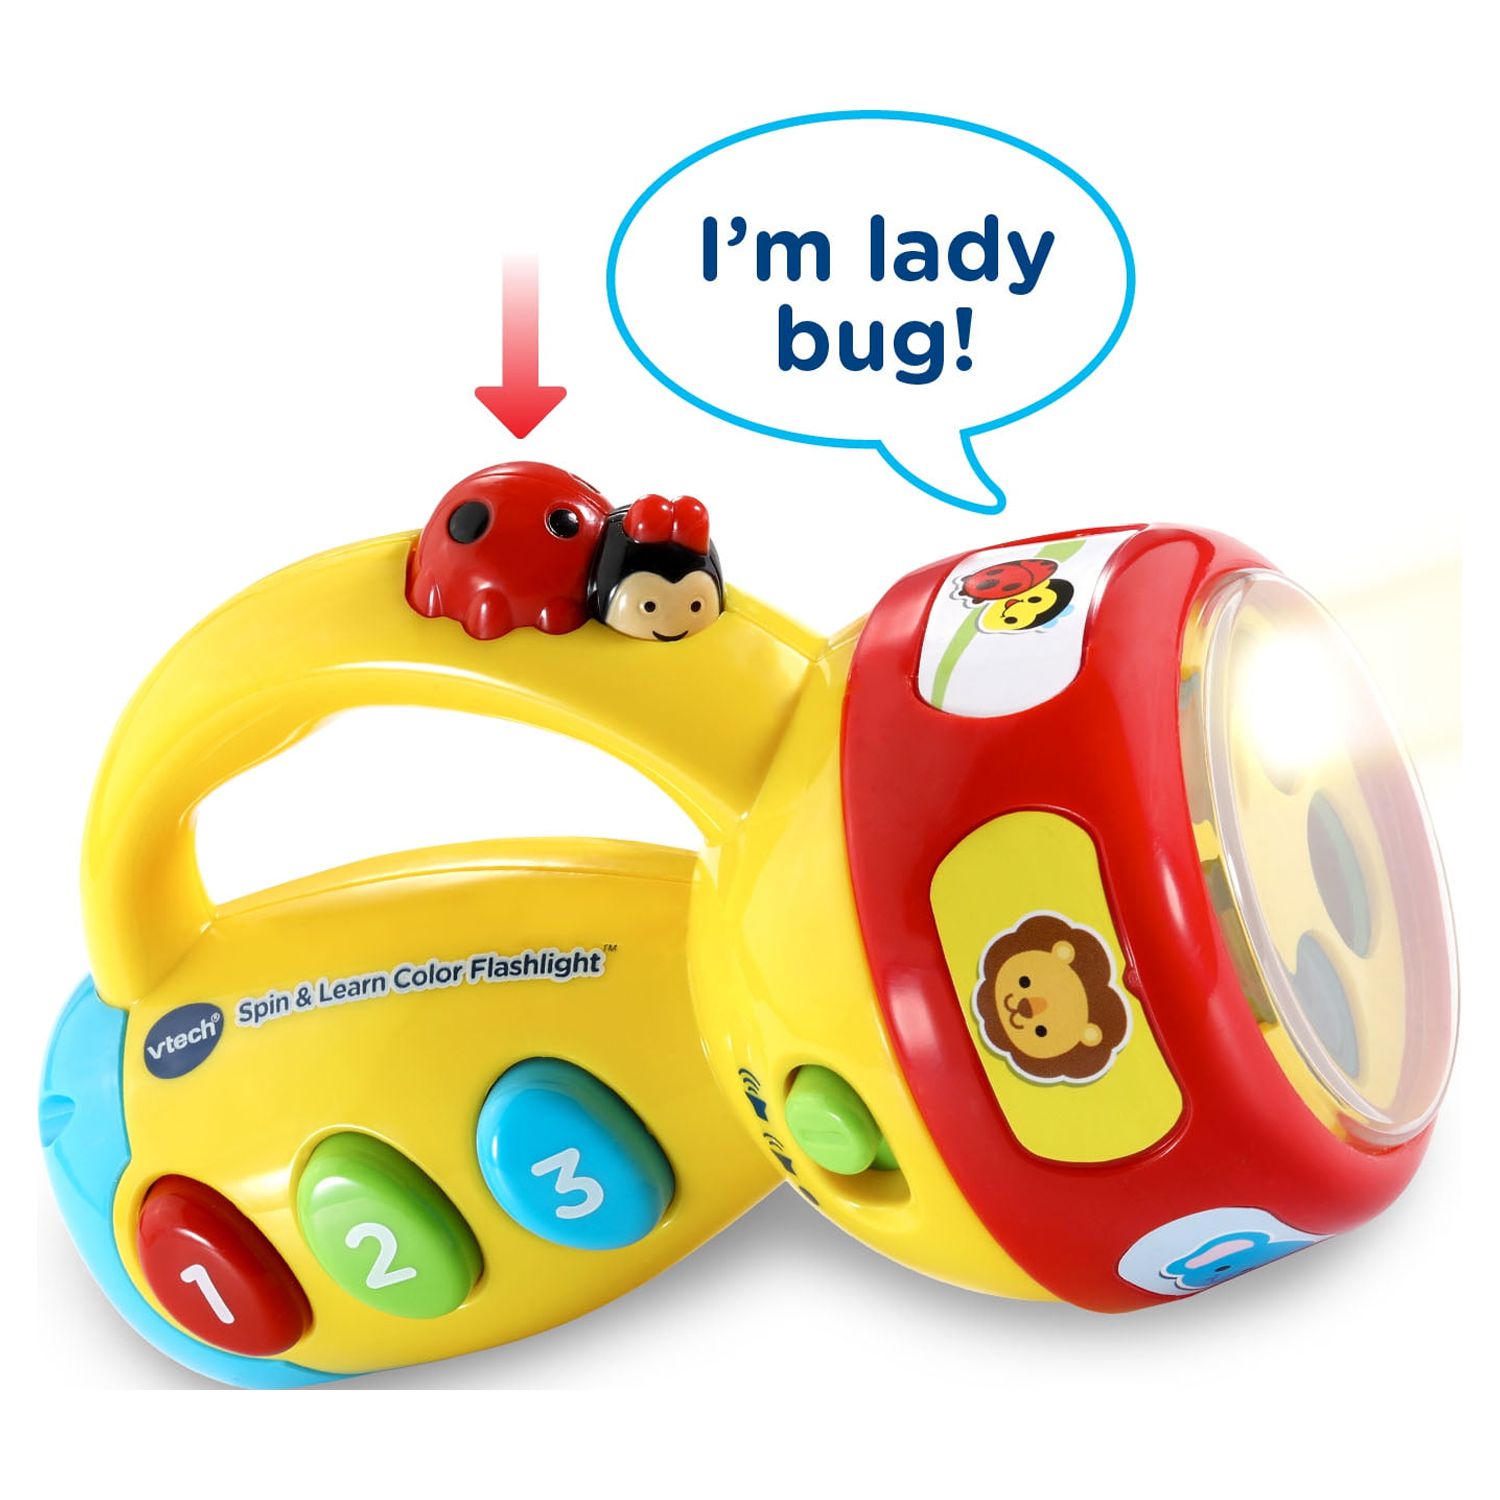 VTech, Spin and Learn Color Flashlight, Toddler Learning Toy - image 4 of 8